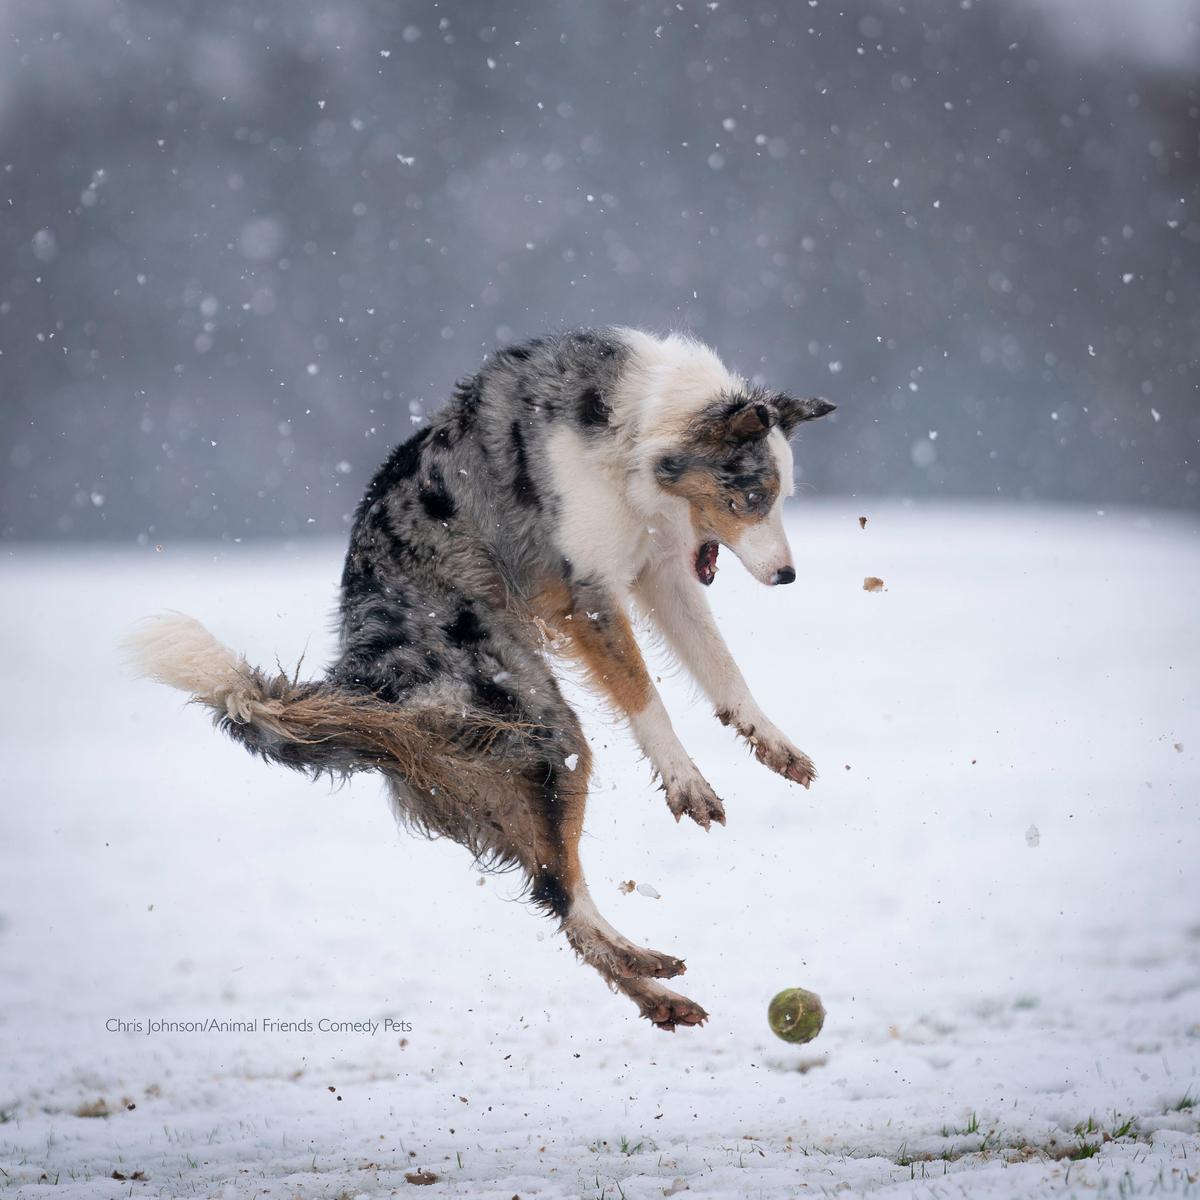 "This is Star playing in the snow in a local field and getting surprised by a passing tennis ball." (Courtesy of Christopher Johnson/<a href="https://www.facebook.com/AnimalFriendsPetInsurance">Animal Friends Comedy Pets</a>)